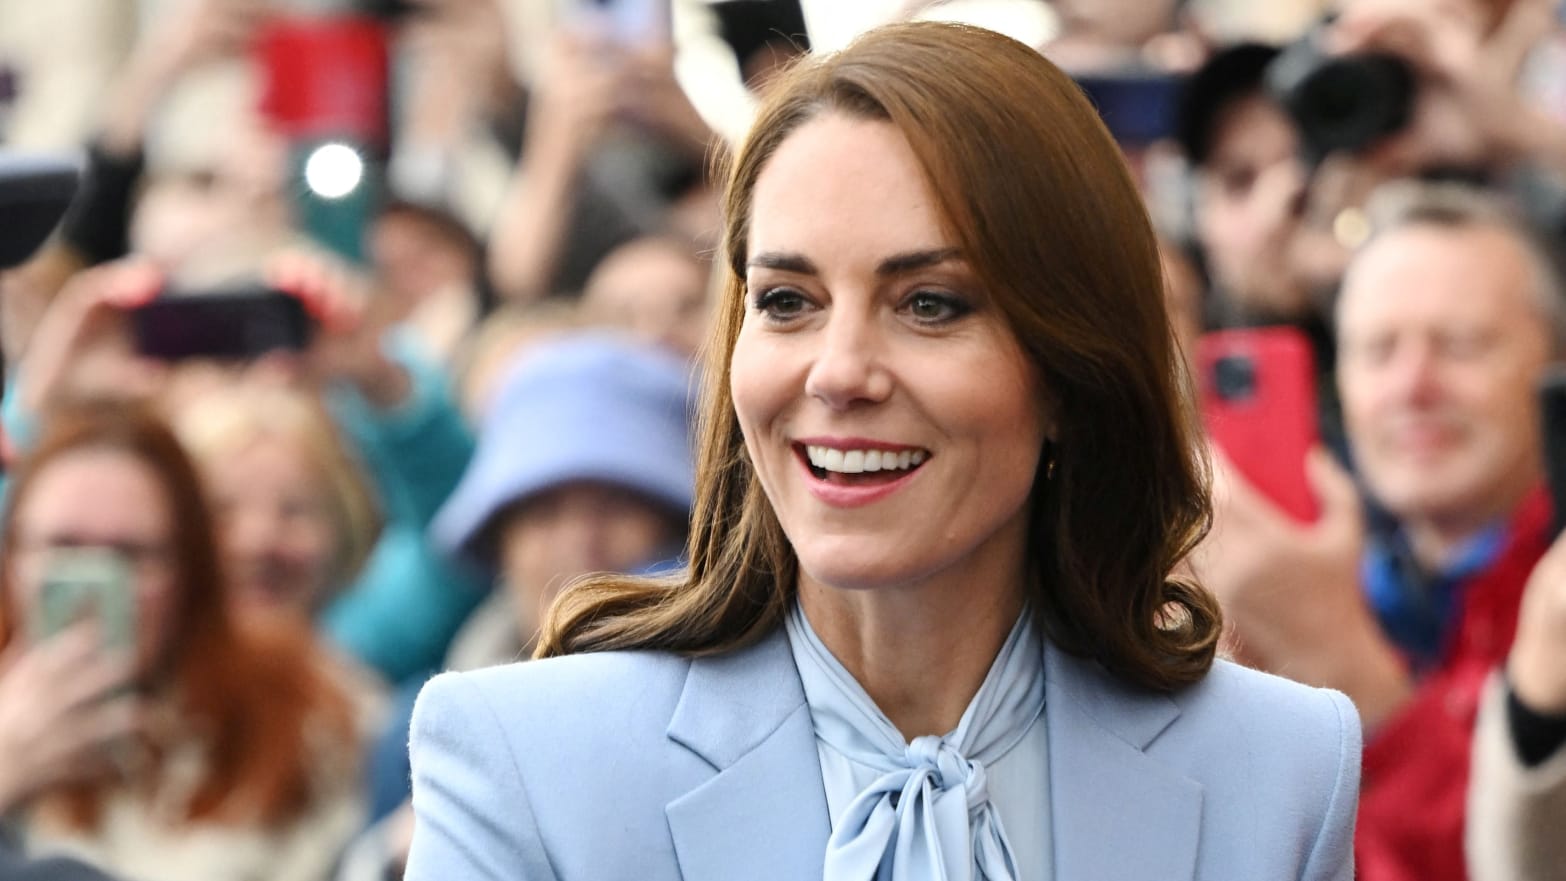 AFP says it no longer considers Kensington Palace a ‘trusted source’ after Kate Middleton admitted to editing a photograph which news agencies ultimately pulled from circulation.